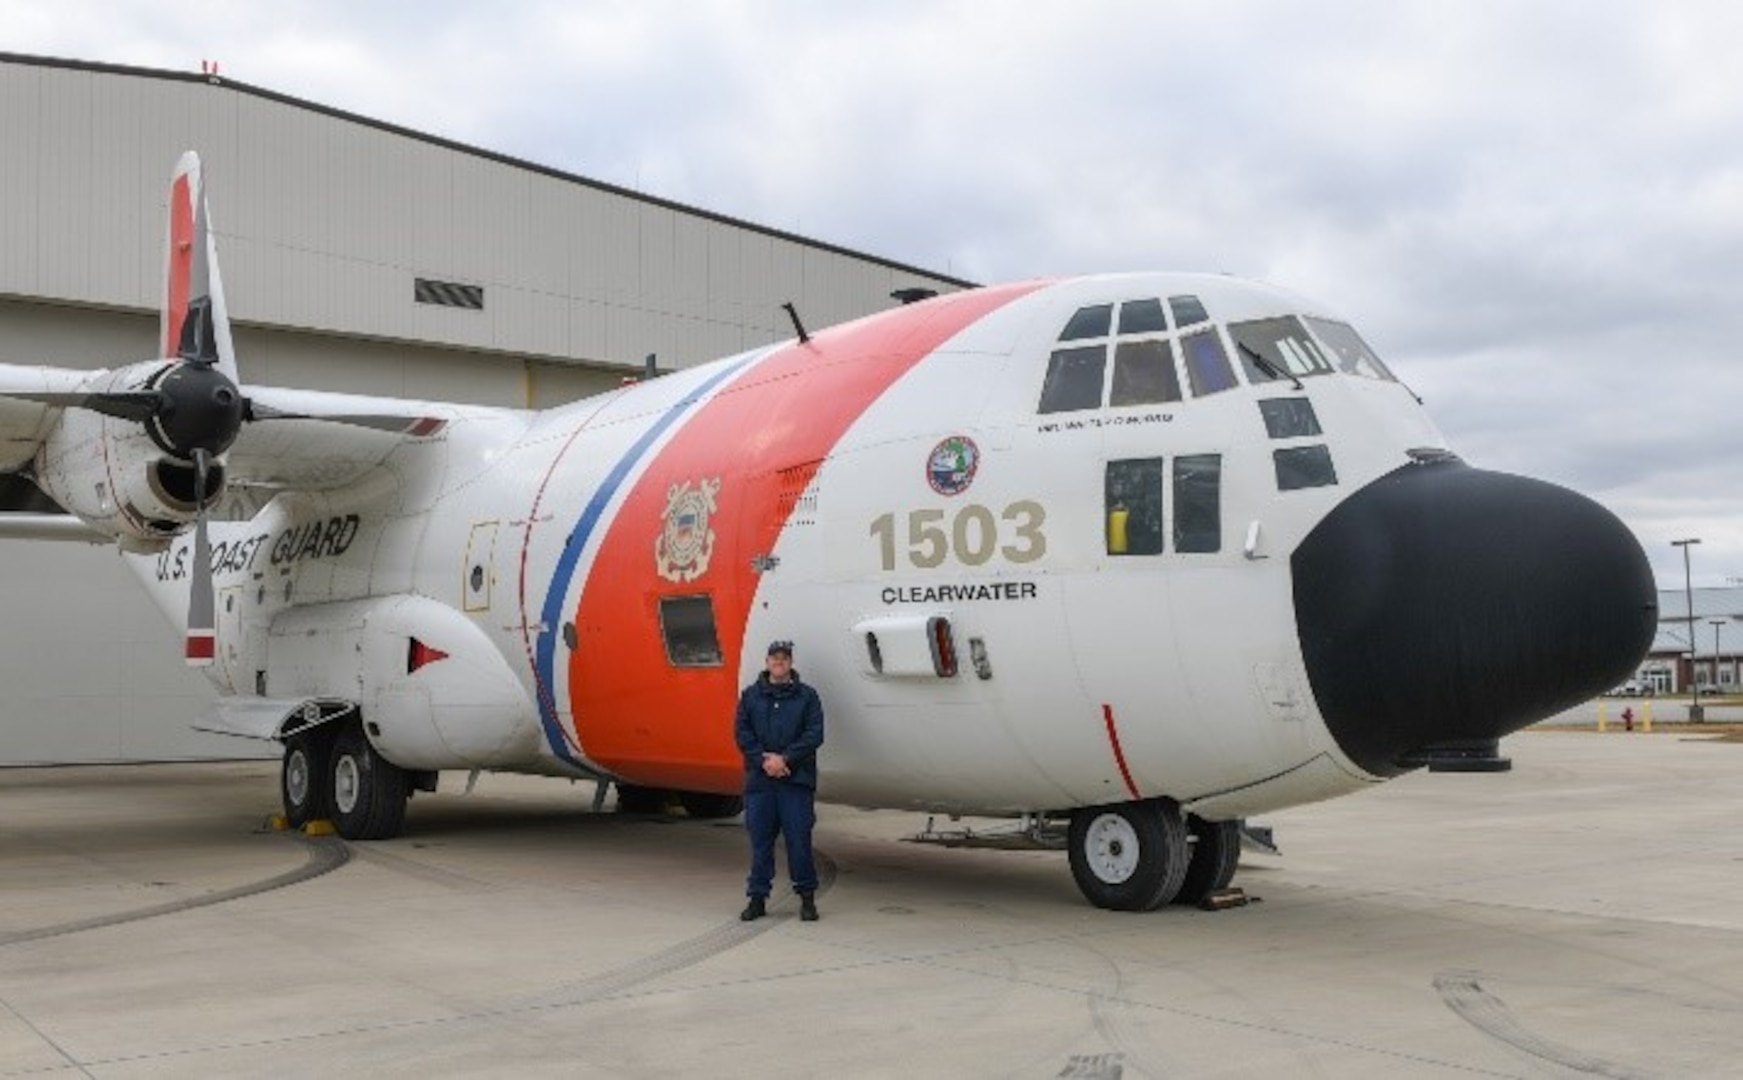 U.S. Coast Guard C-130 aircraft number 1503 is seen on deck at the Fixed Wing Training facility. December 22, 2020 photo submitted by ATTC unit.